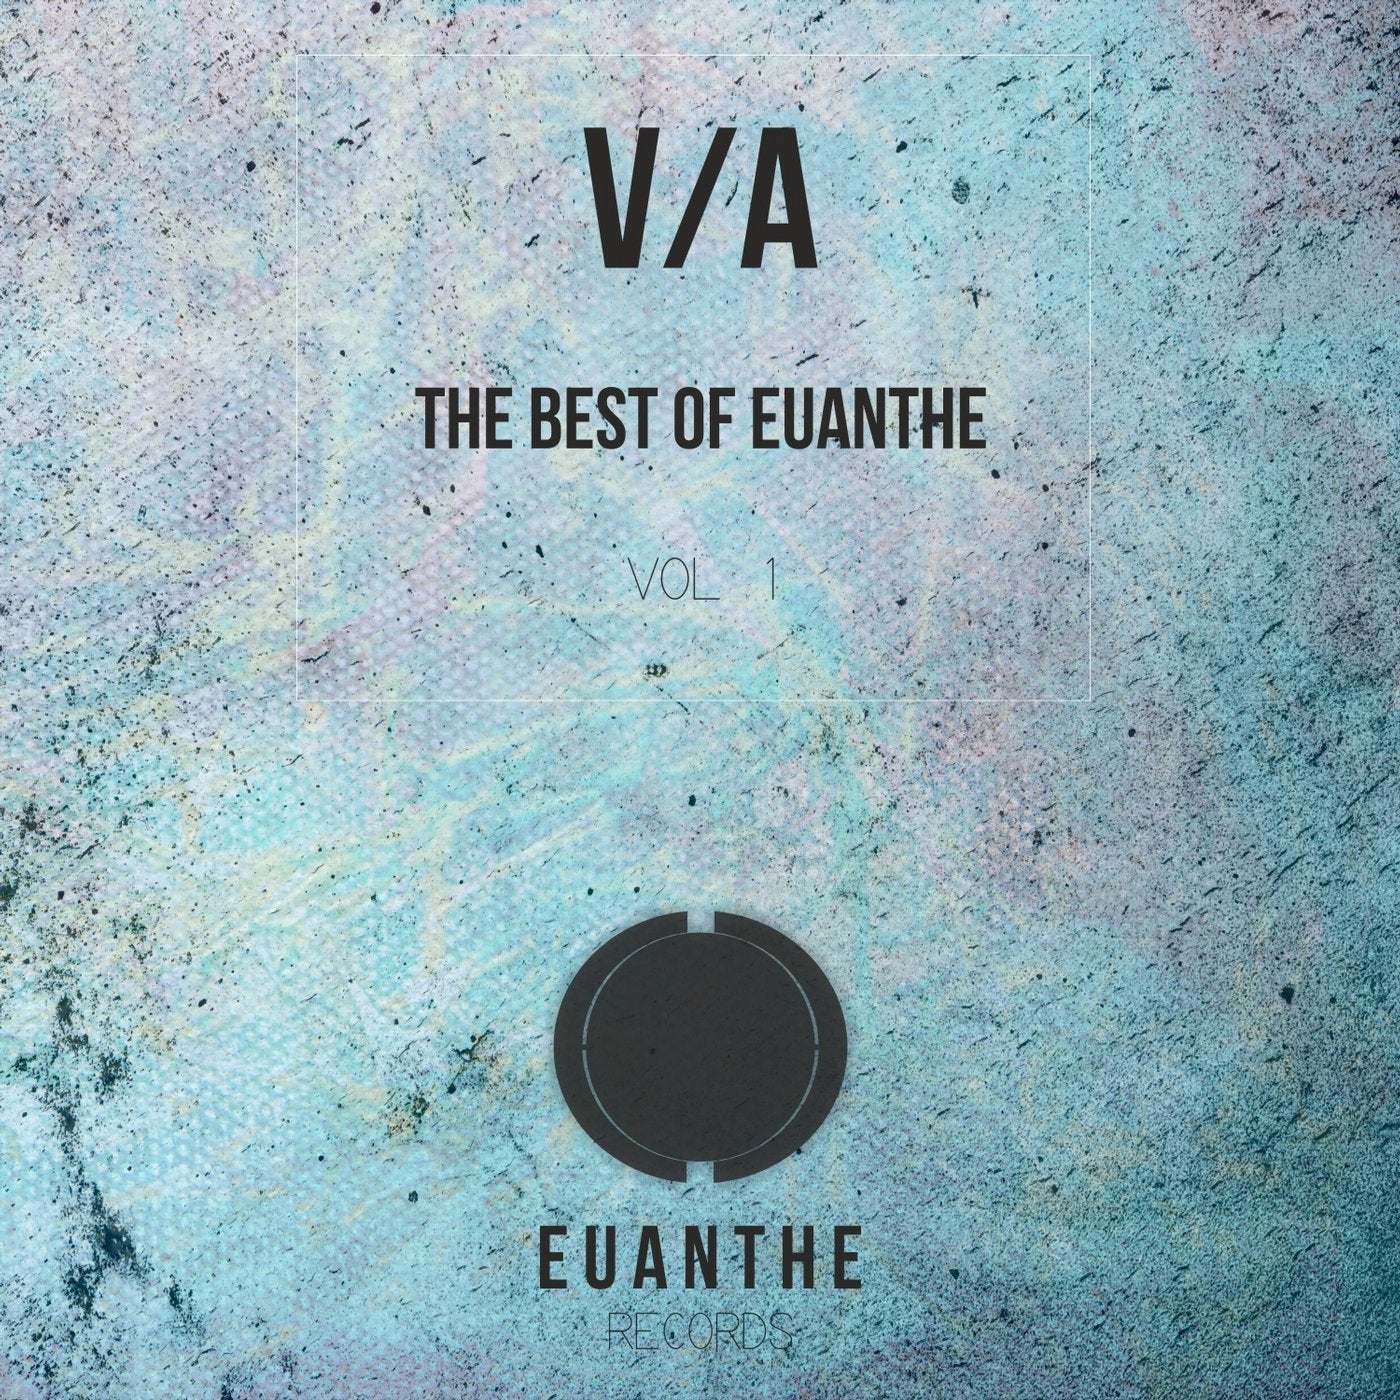 The Best of Euanthe Vol.1